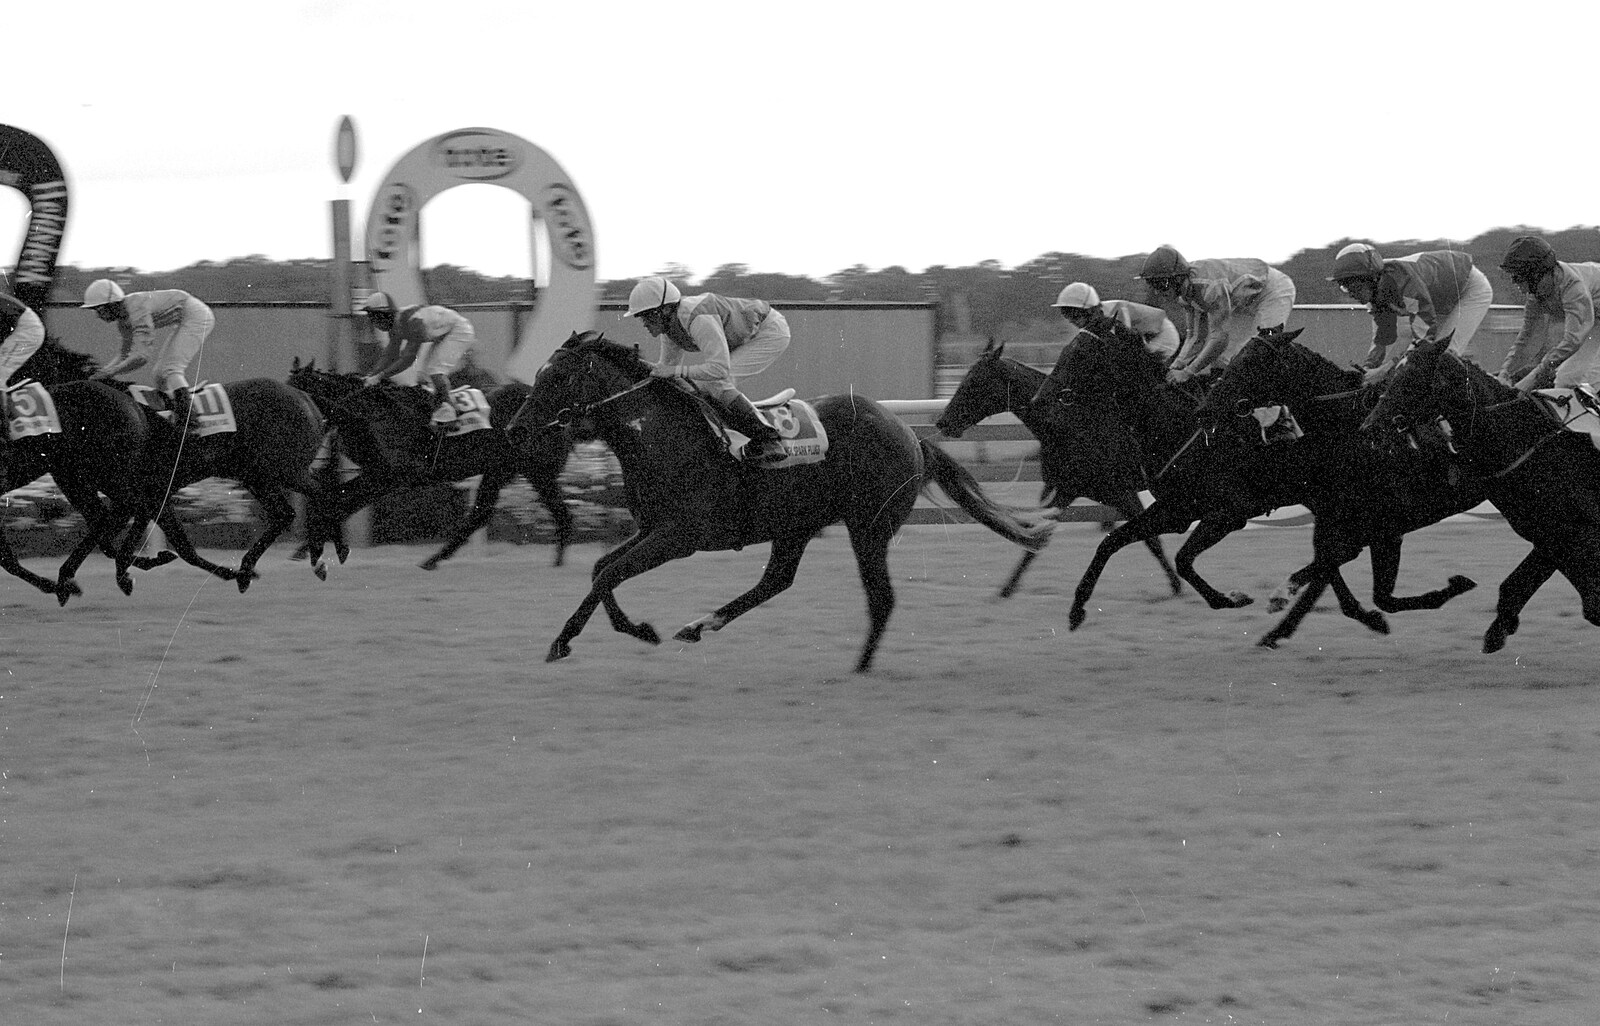 On the finishing line from 3G Lab Goes to the Races, Newmarket, Suffolk - 15th July 2001